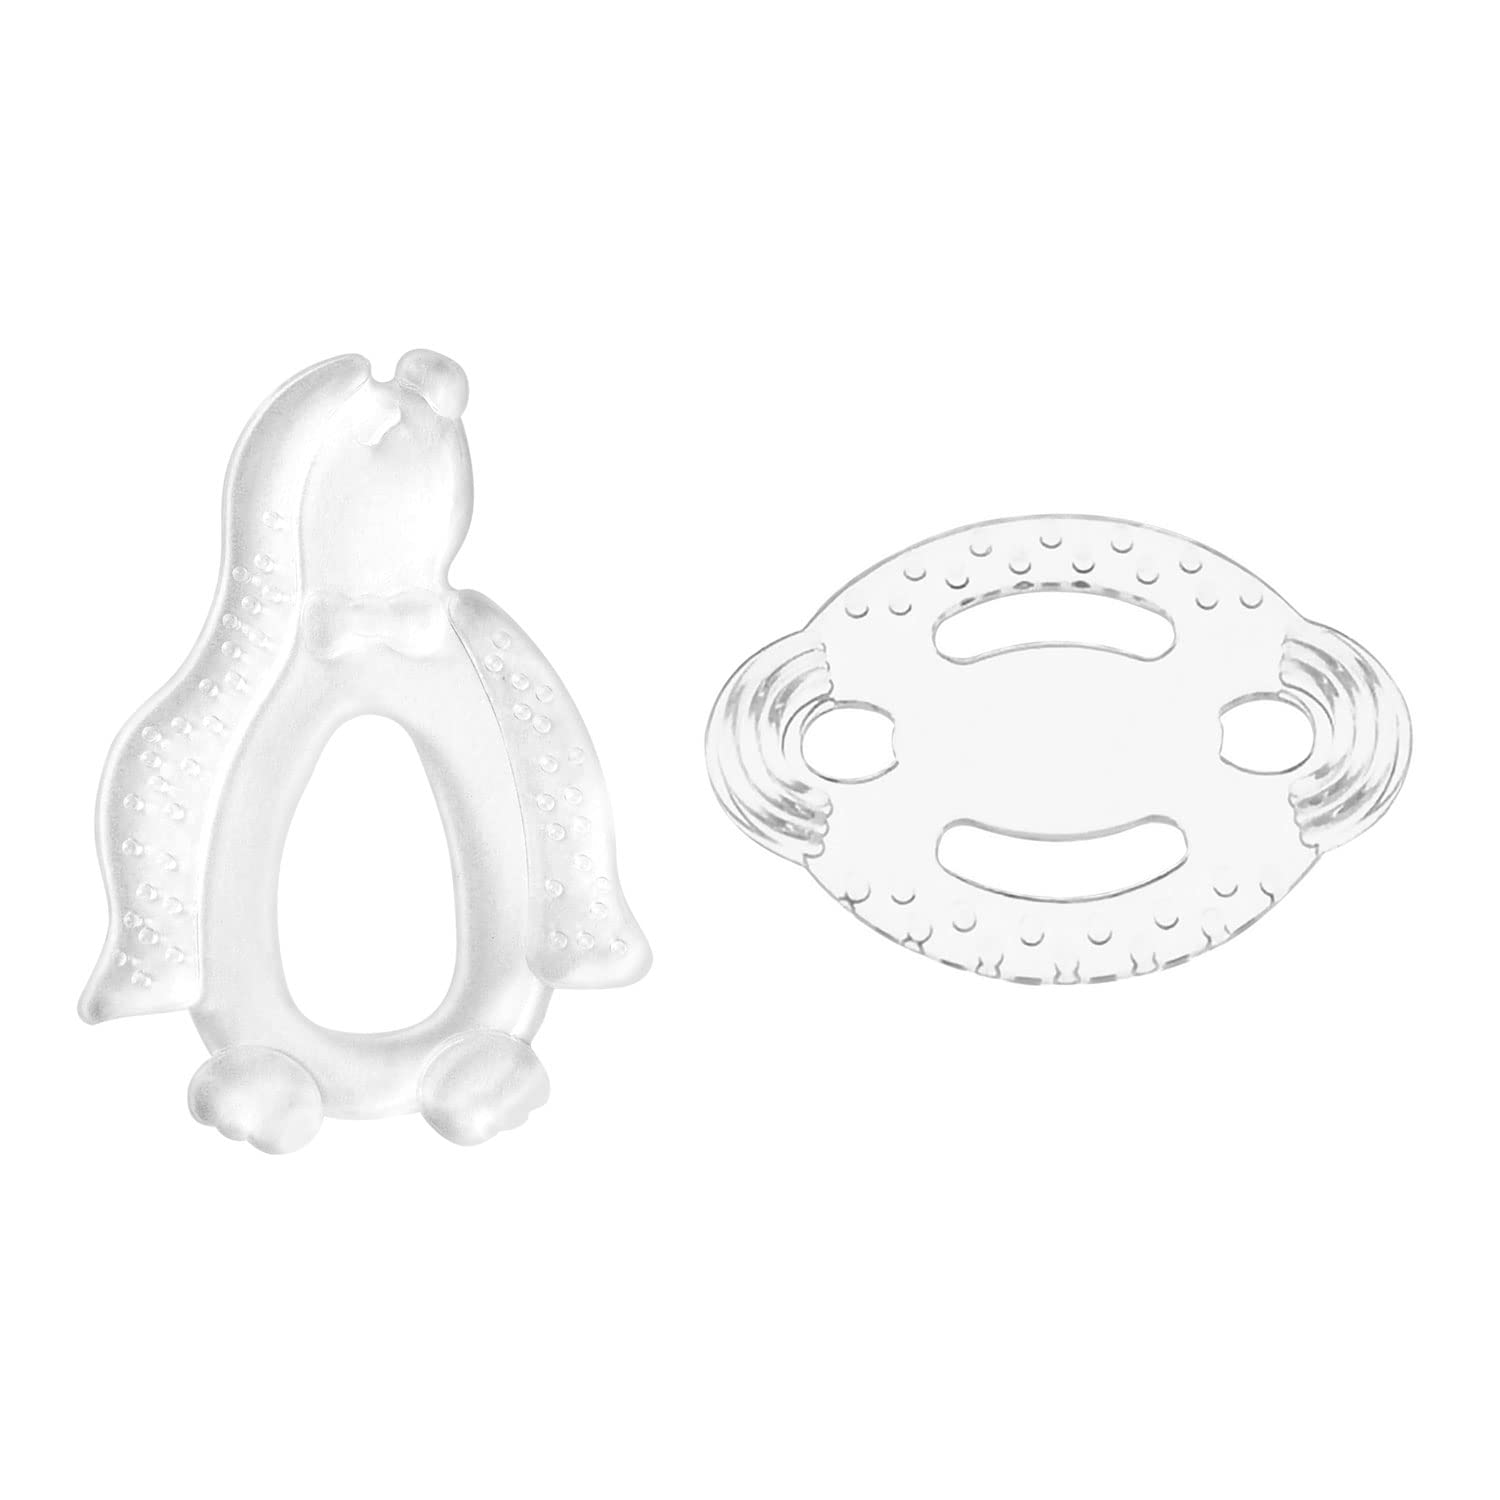 Hopop Easy Grip Silicone Teethers - Transparent 4m+